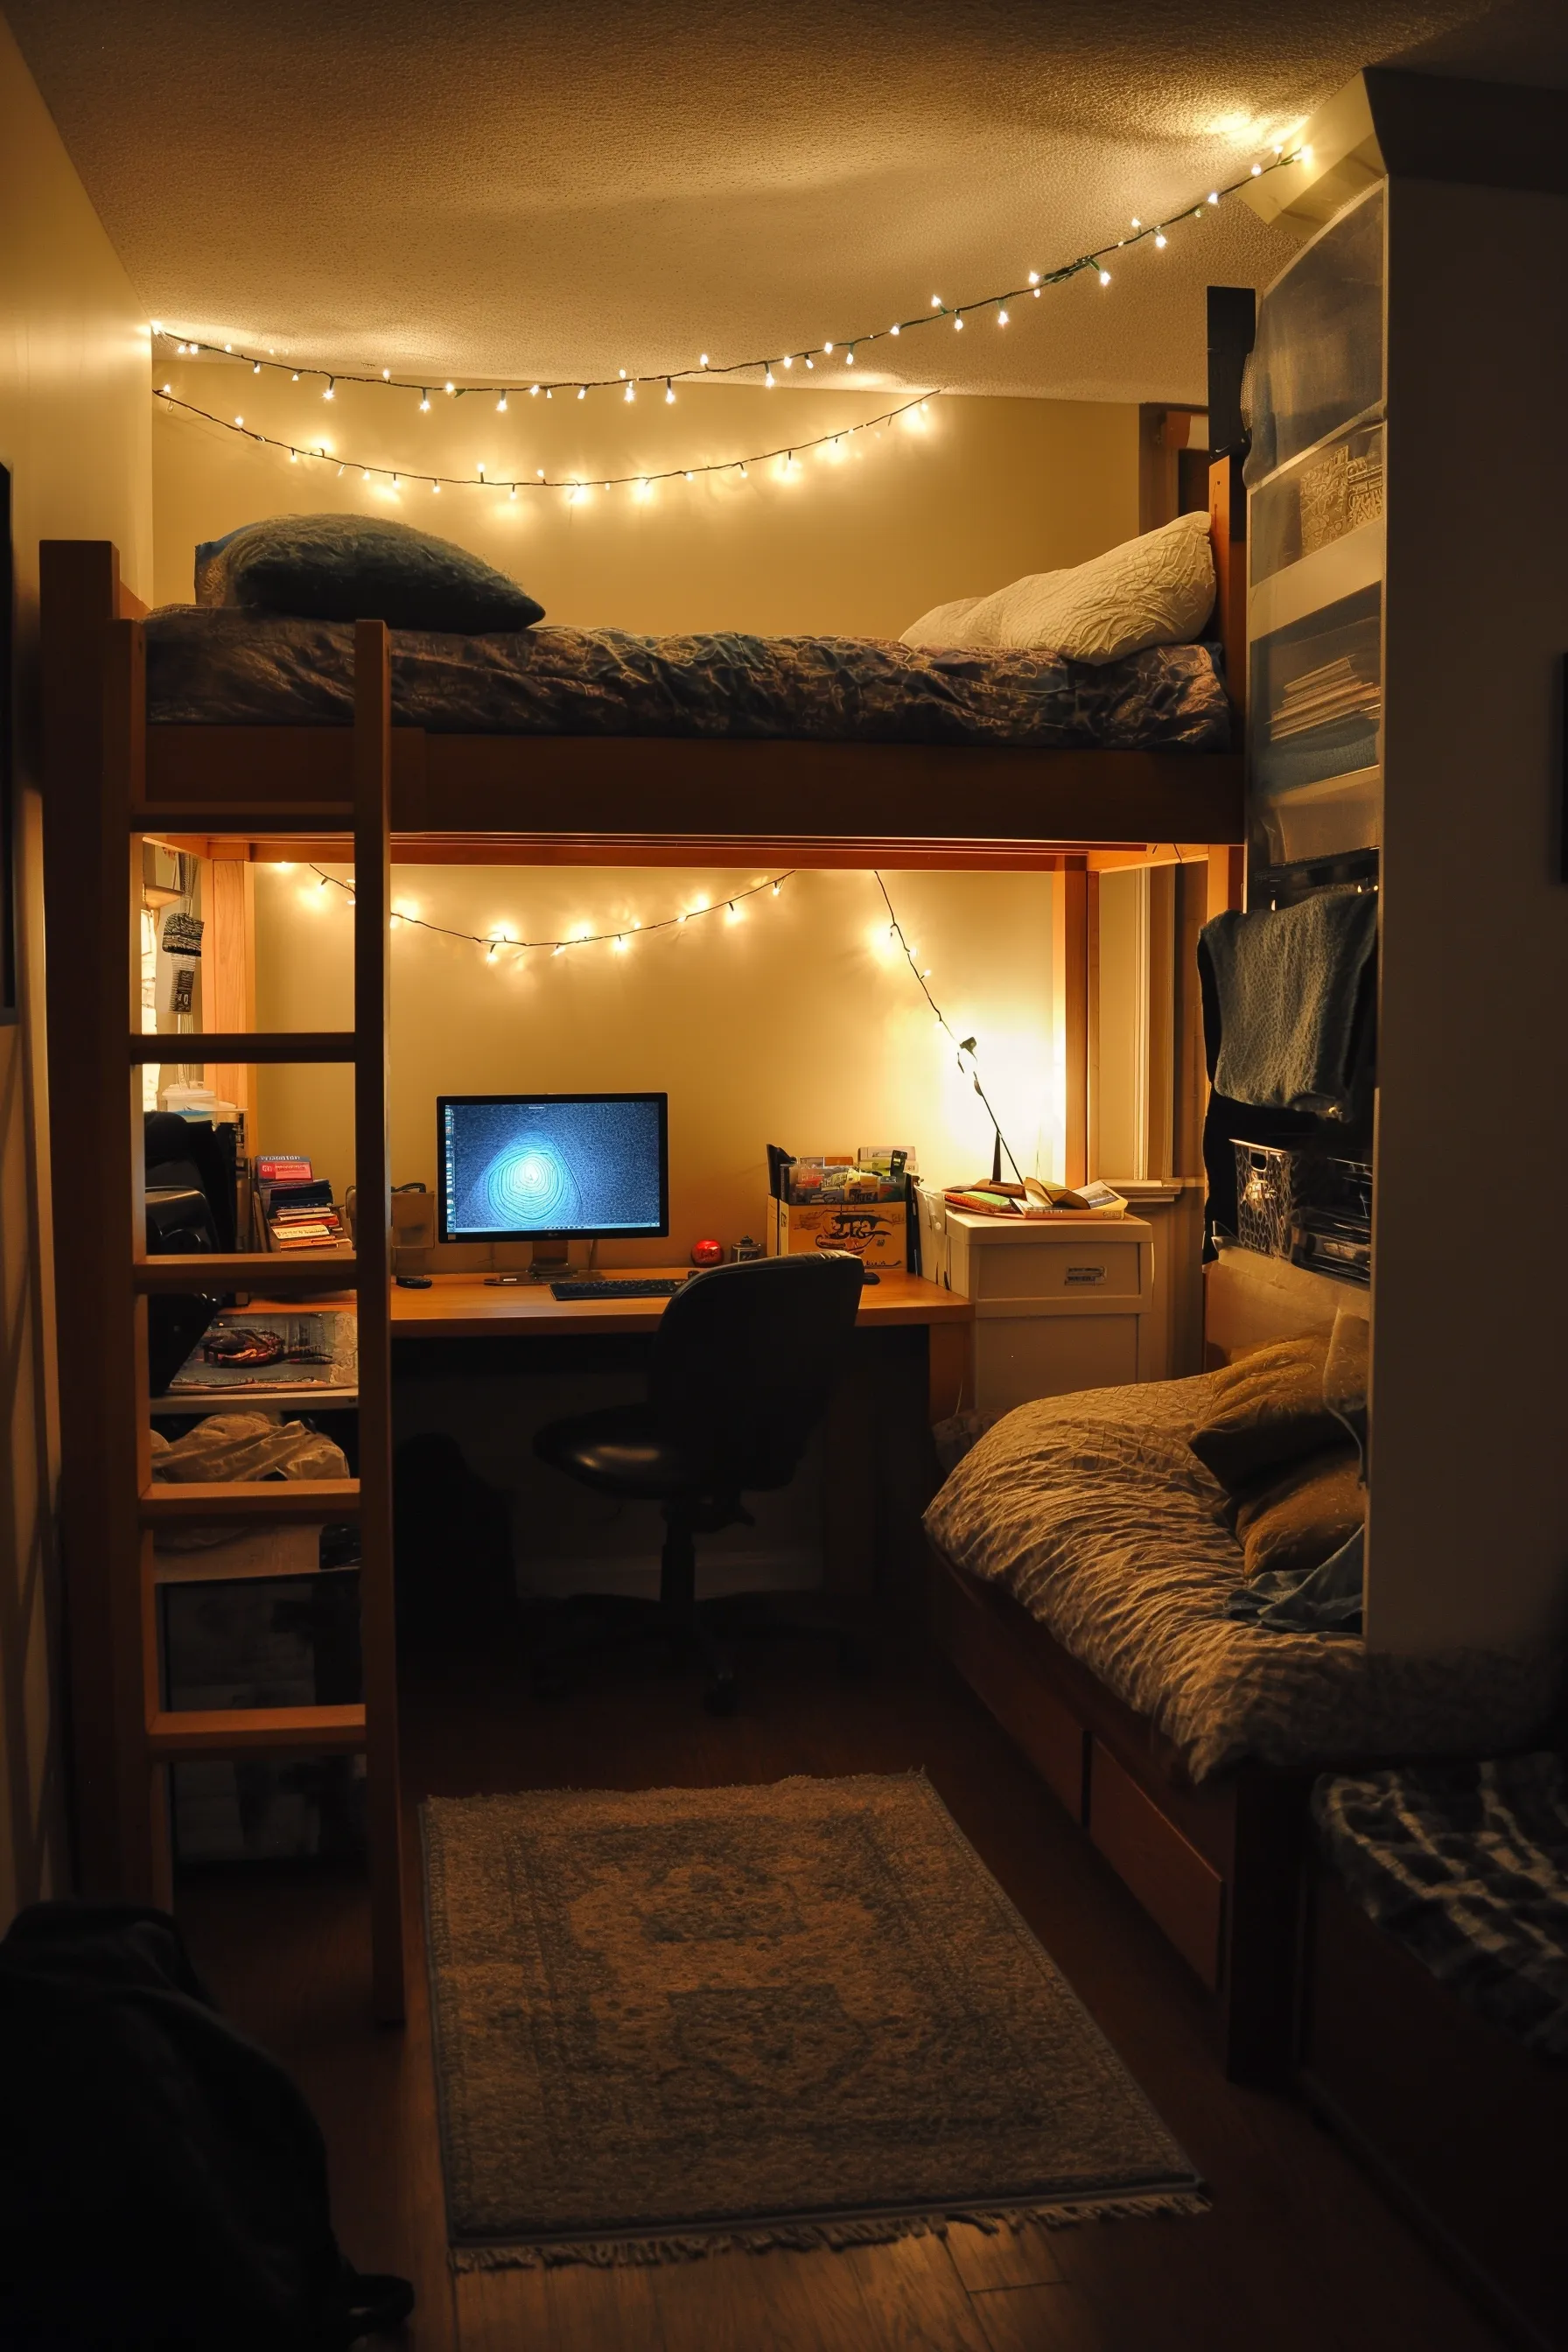 A social space for dorm decorating ideas for guys with beanbags